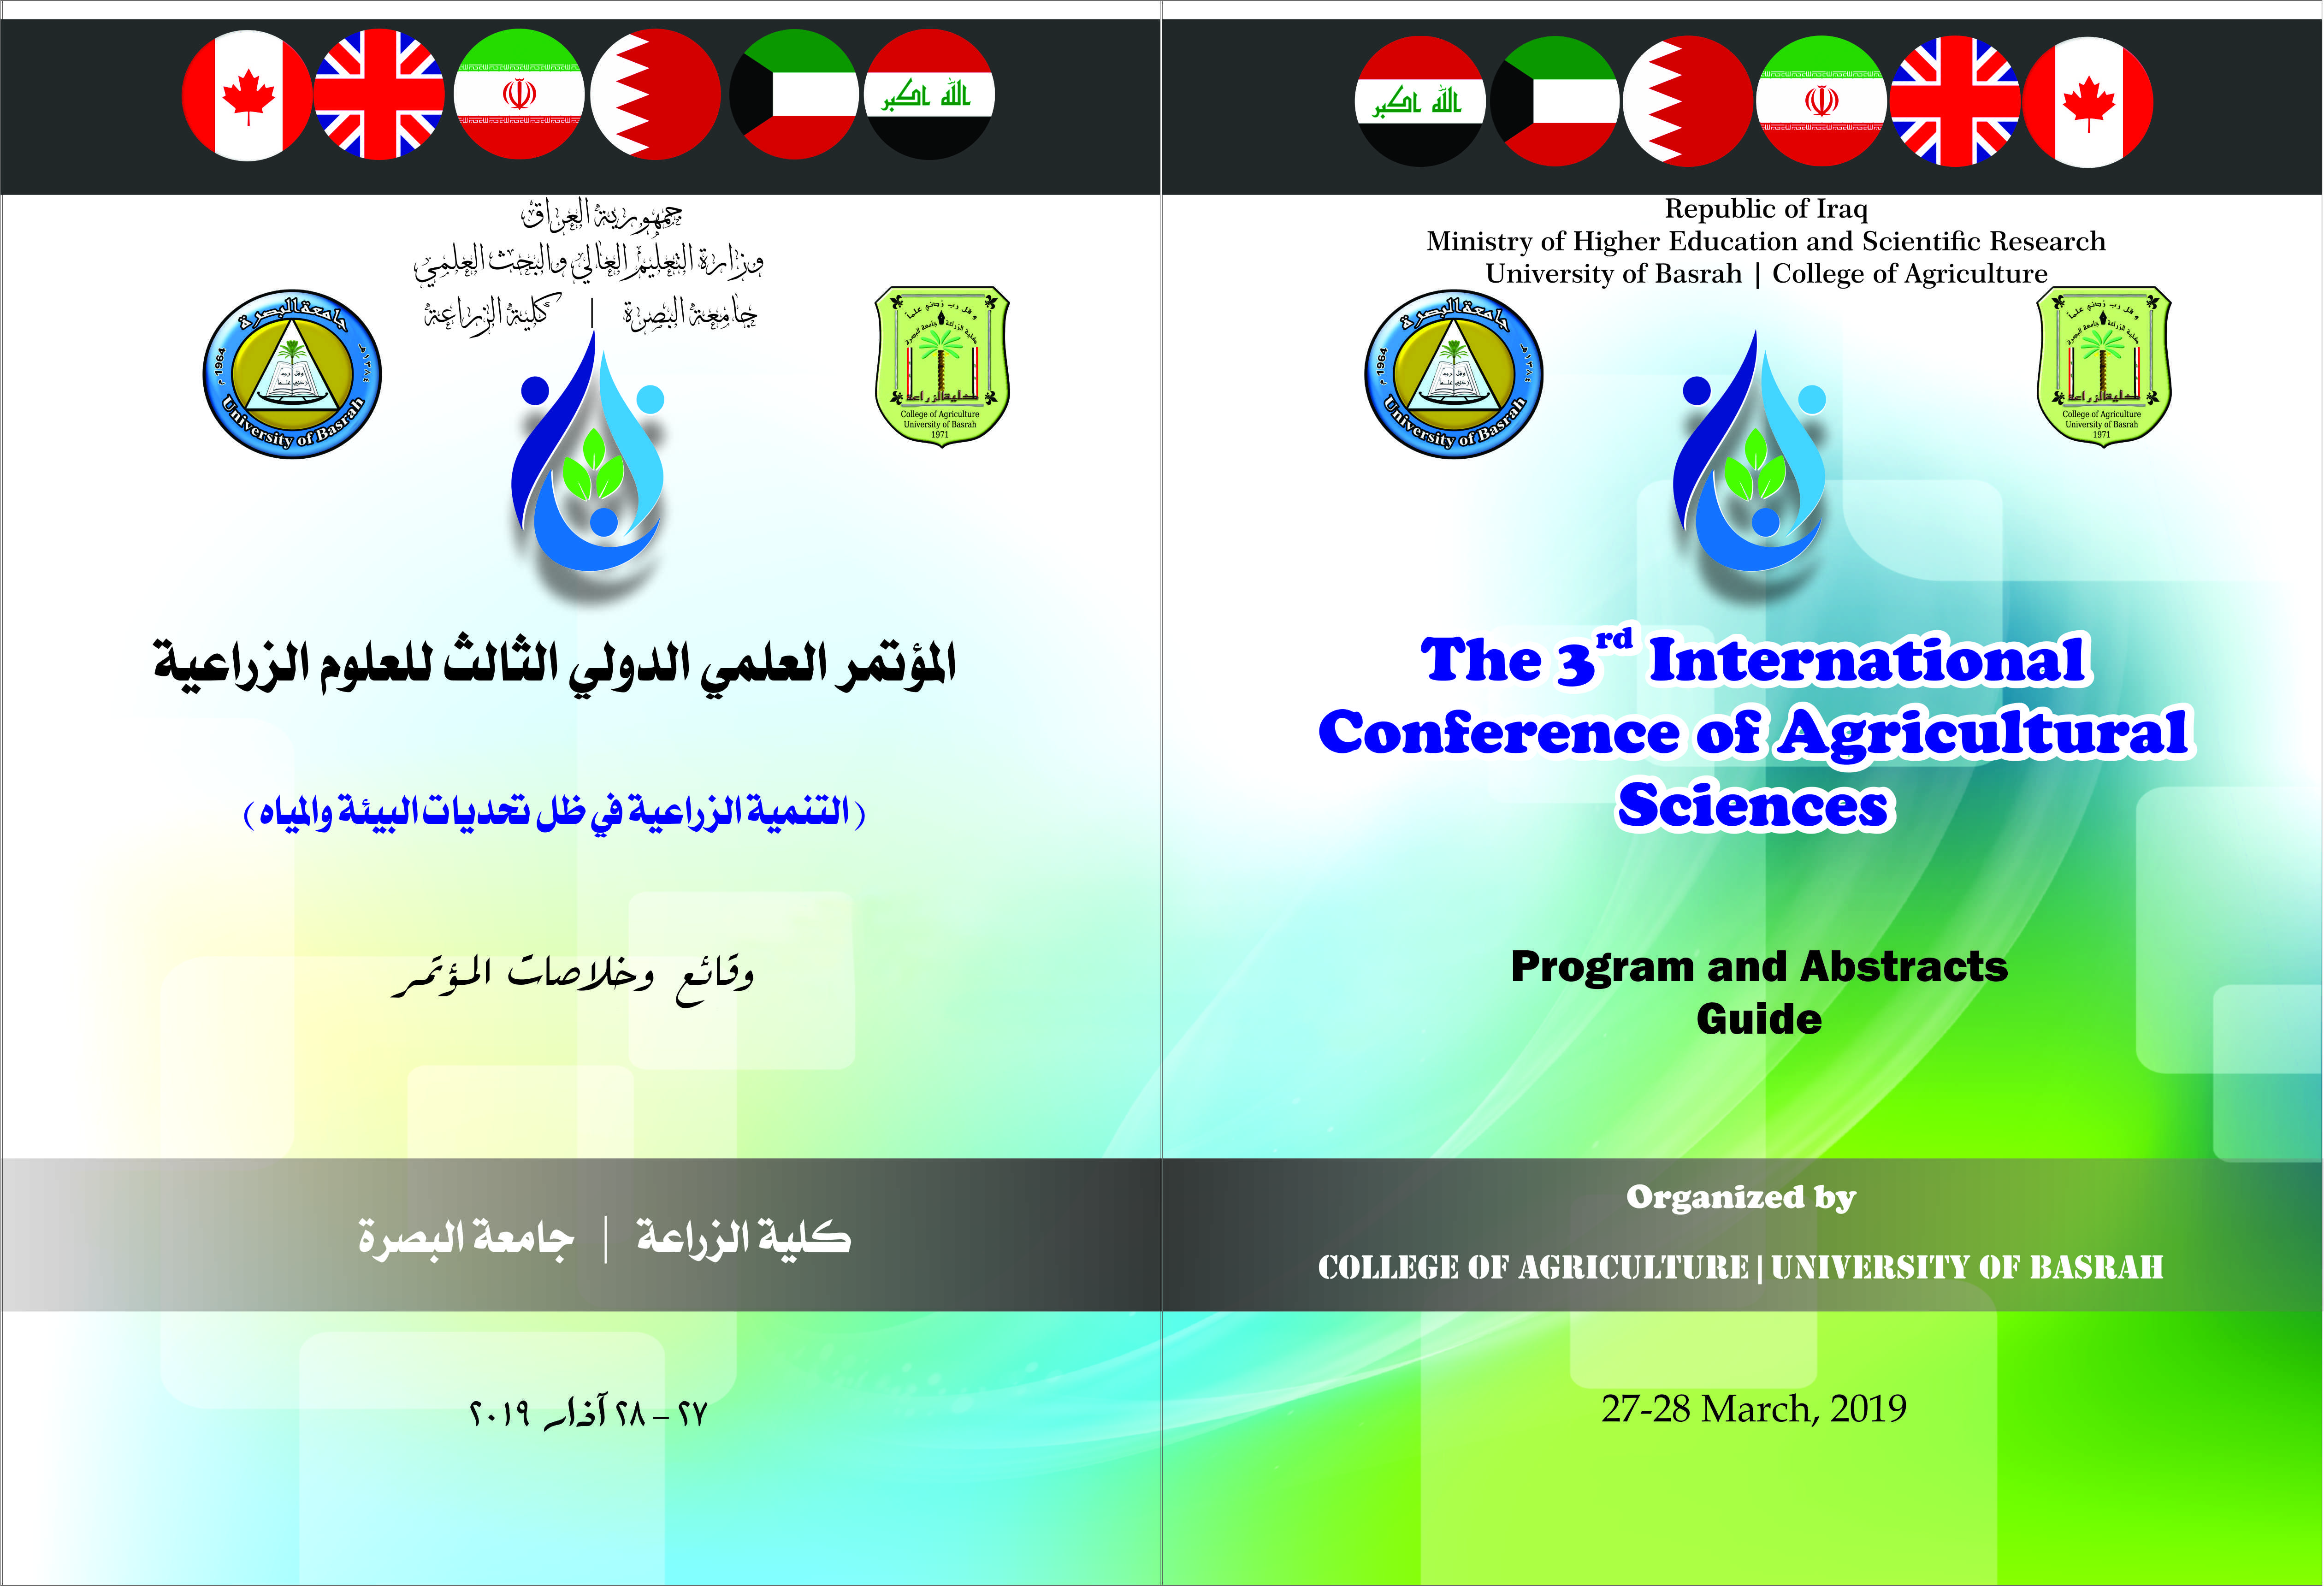 The 3rd International Conference of Agricultural Sciences 27-28 March, 2019